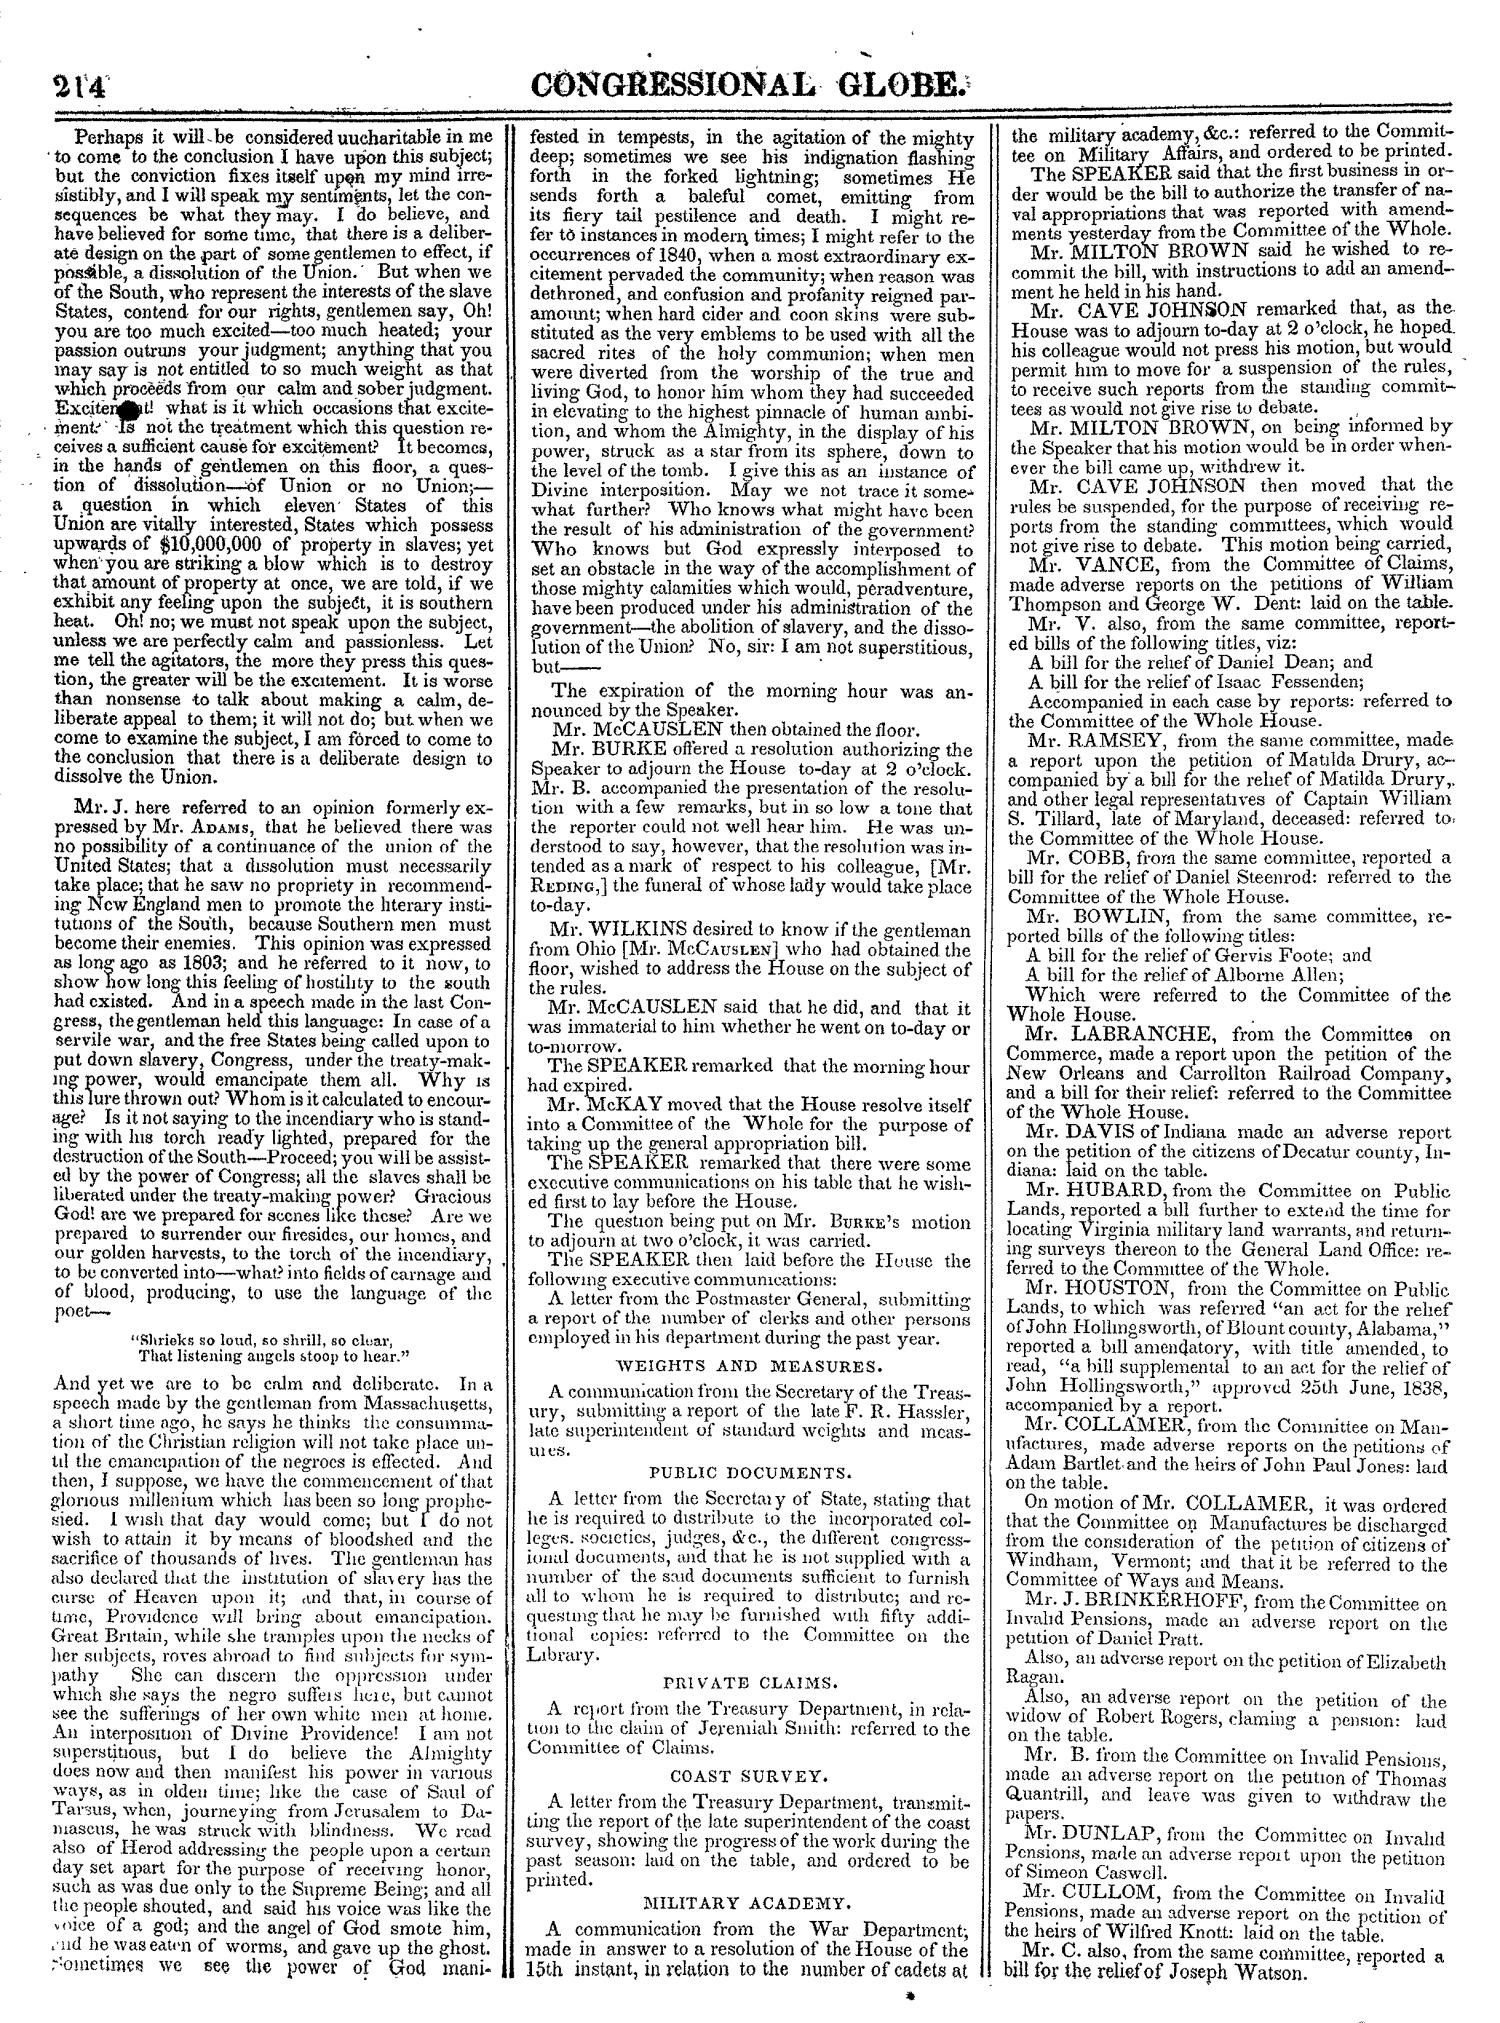 The Congressional Globe, Volume 13, Part 1: Twenty-Eighth Congress, First Session
                                                
                                                    214
                                                